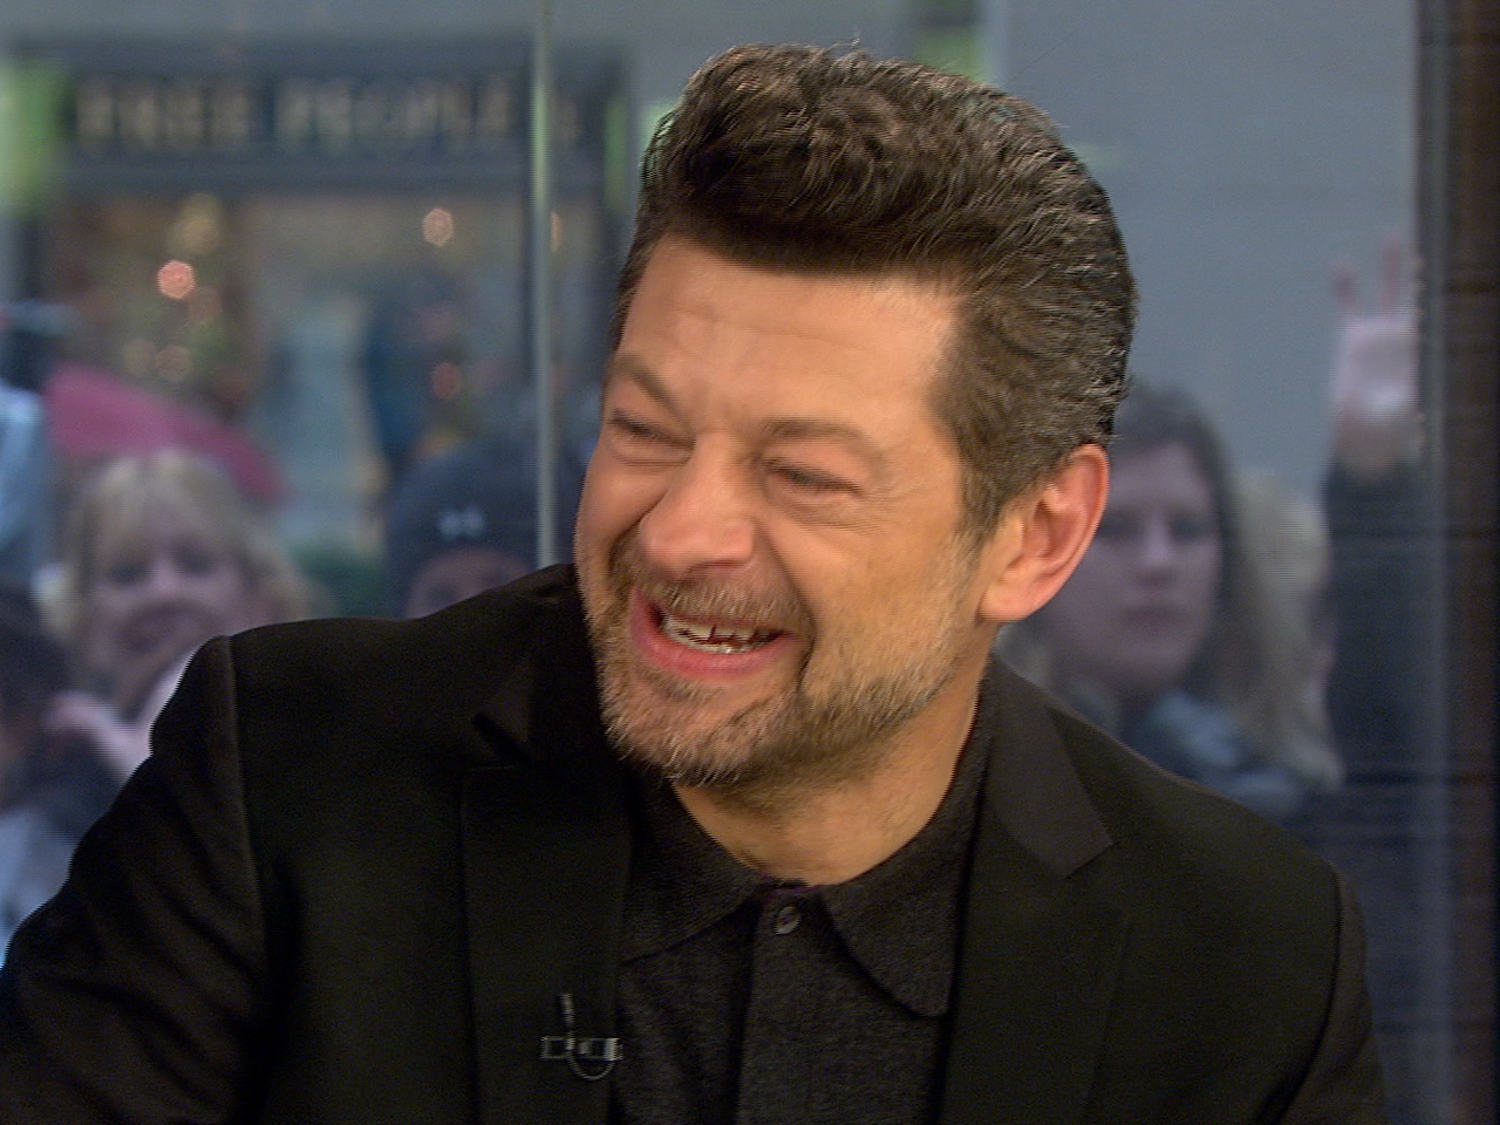 The Lord of the Rings: Gollum Game Voice Actor: Does Andy Serkis